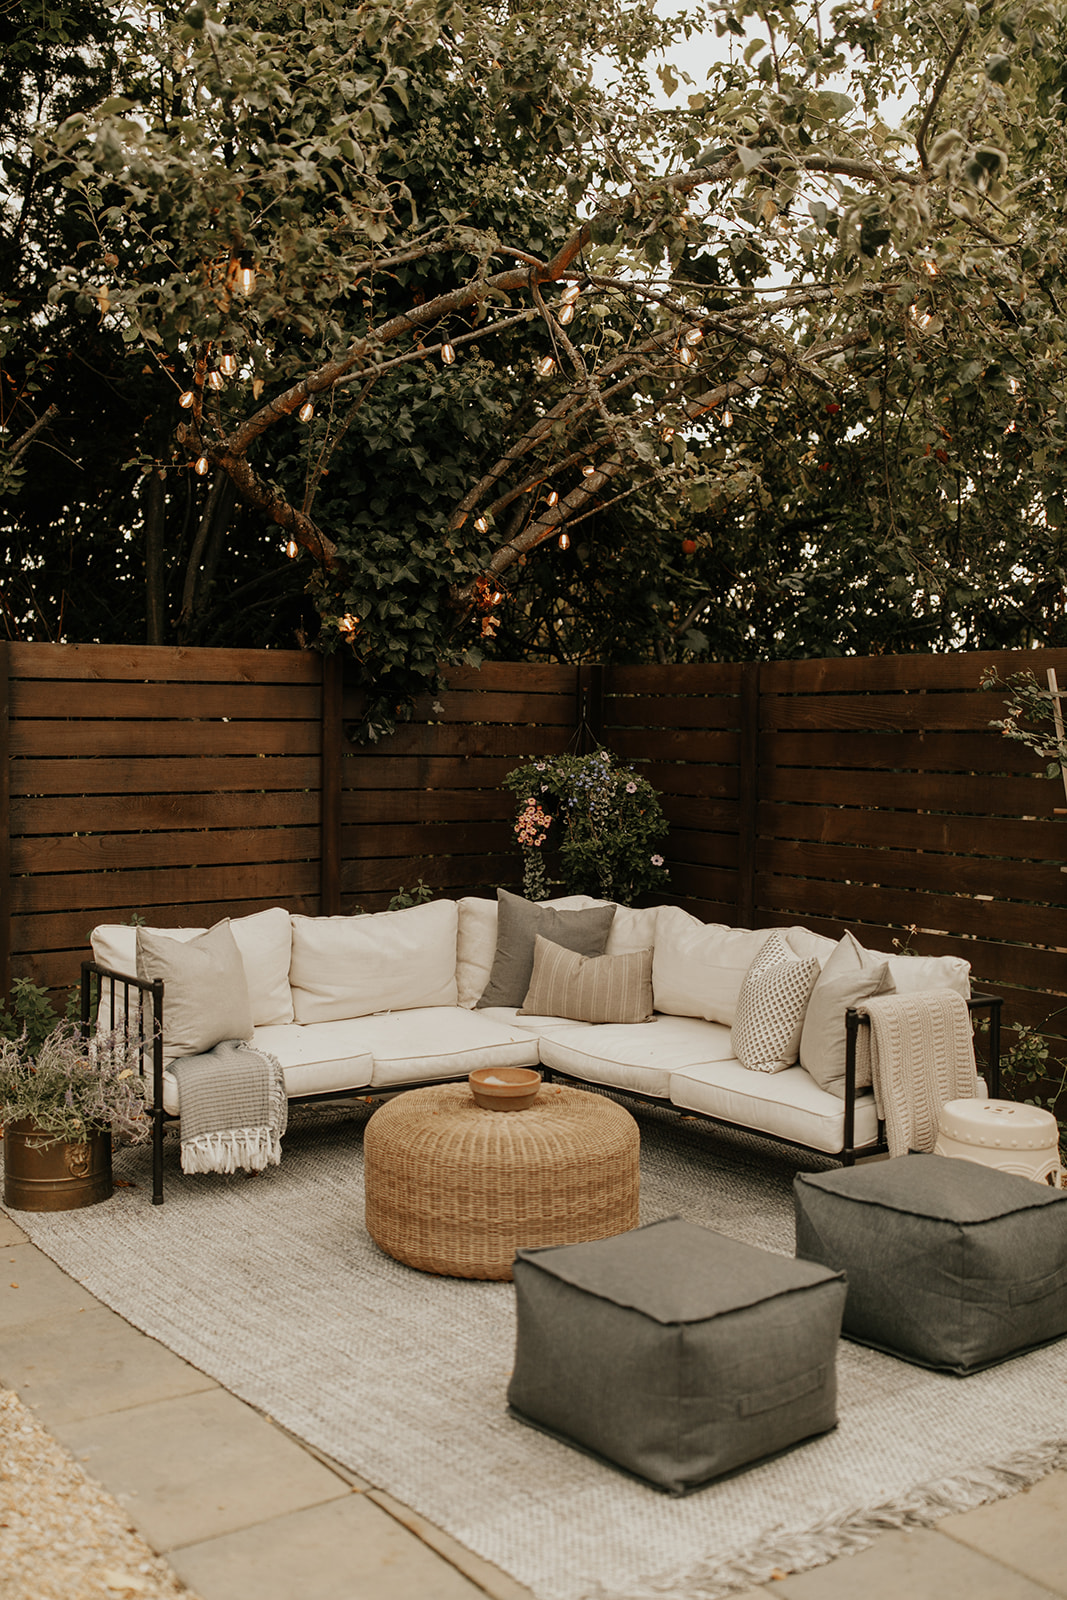 A backyard patio with an outdoor rug, couch with pillows, coffee table and string lights in the tree above